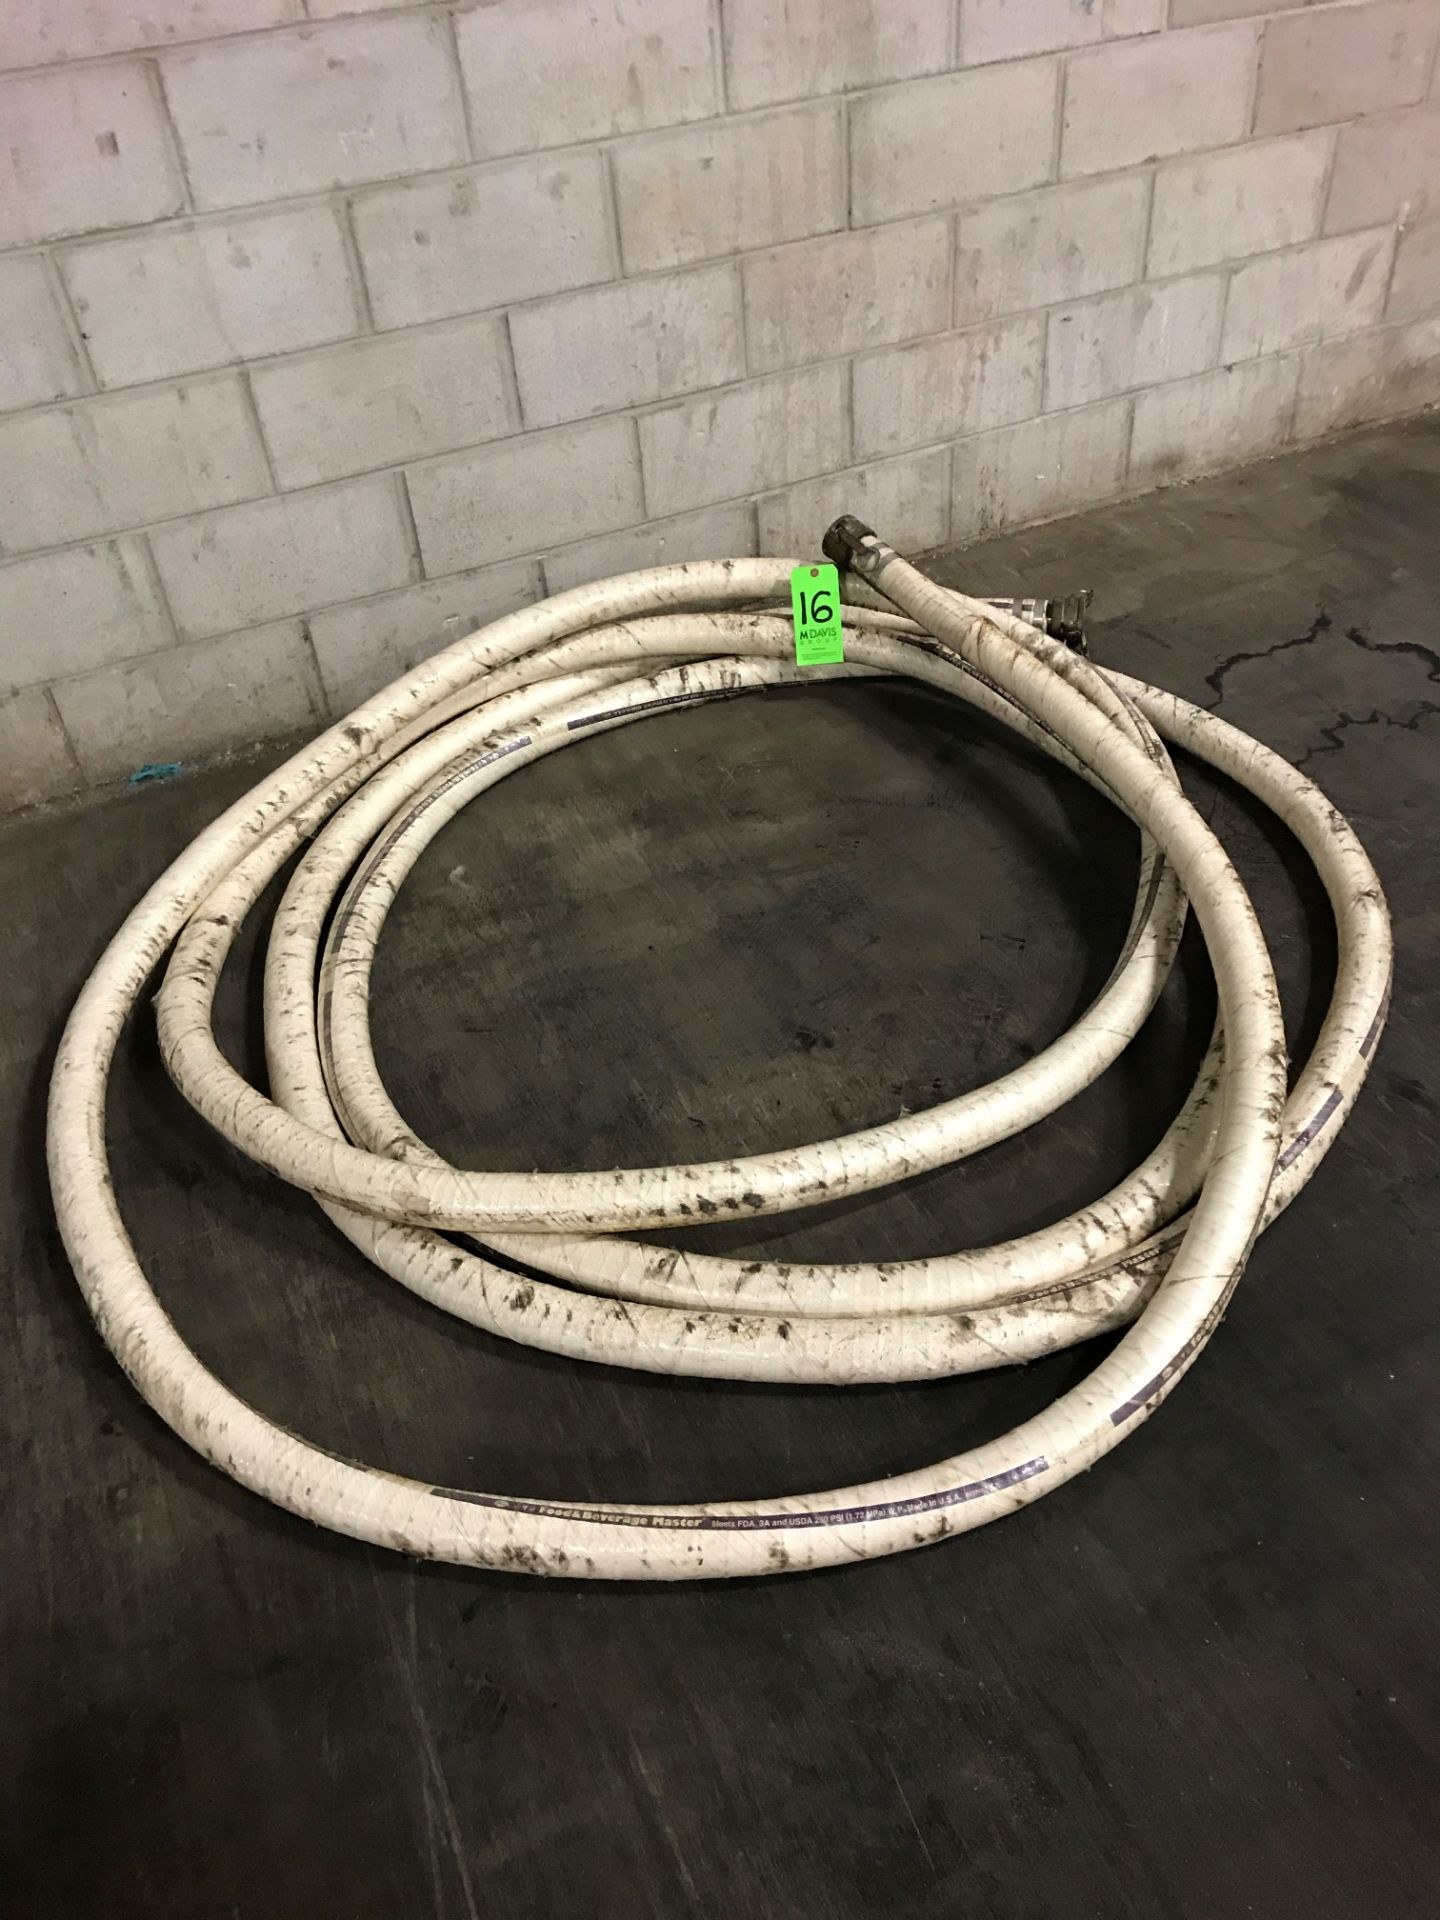 60' 2" Food and Beverage Master Hose, with Camlock Fittings